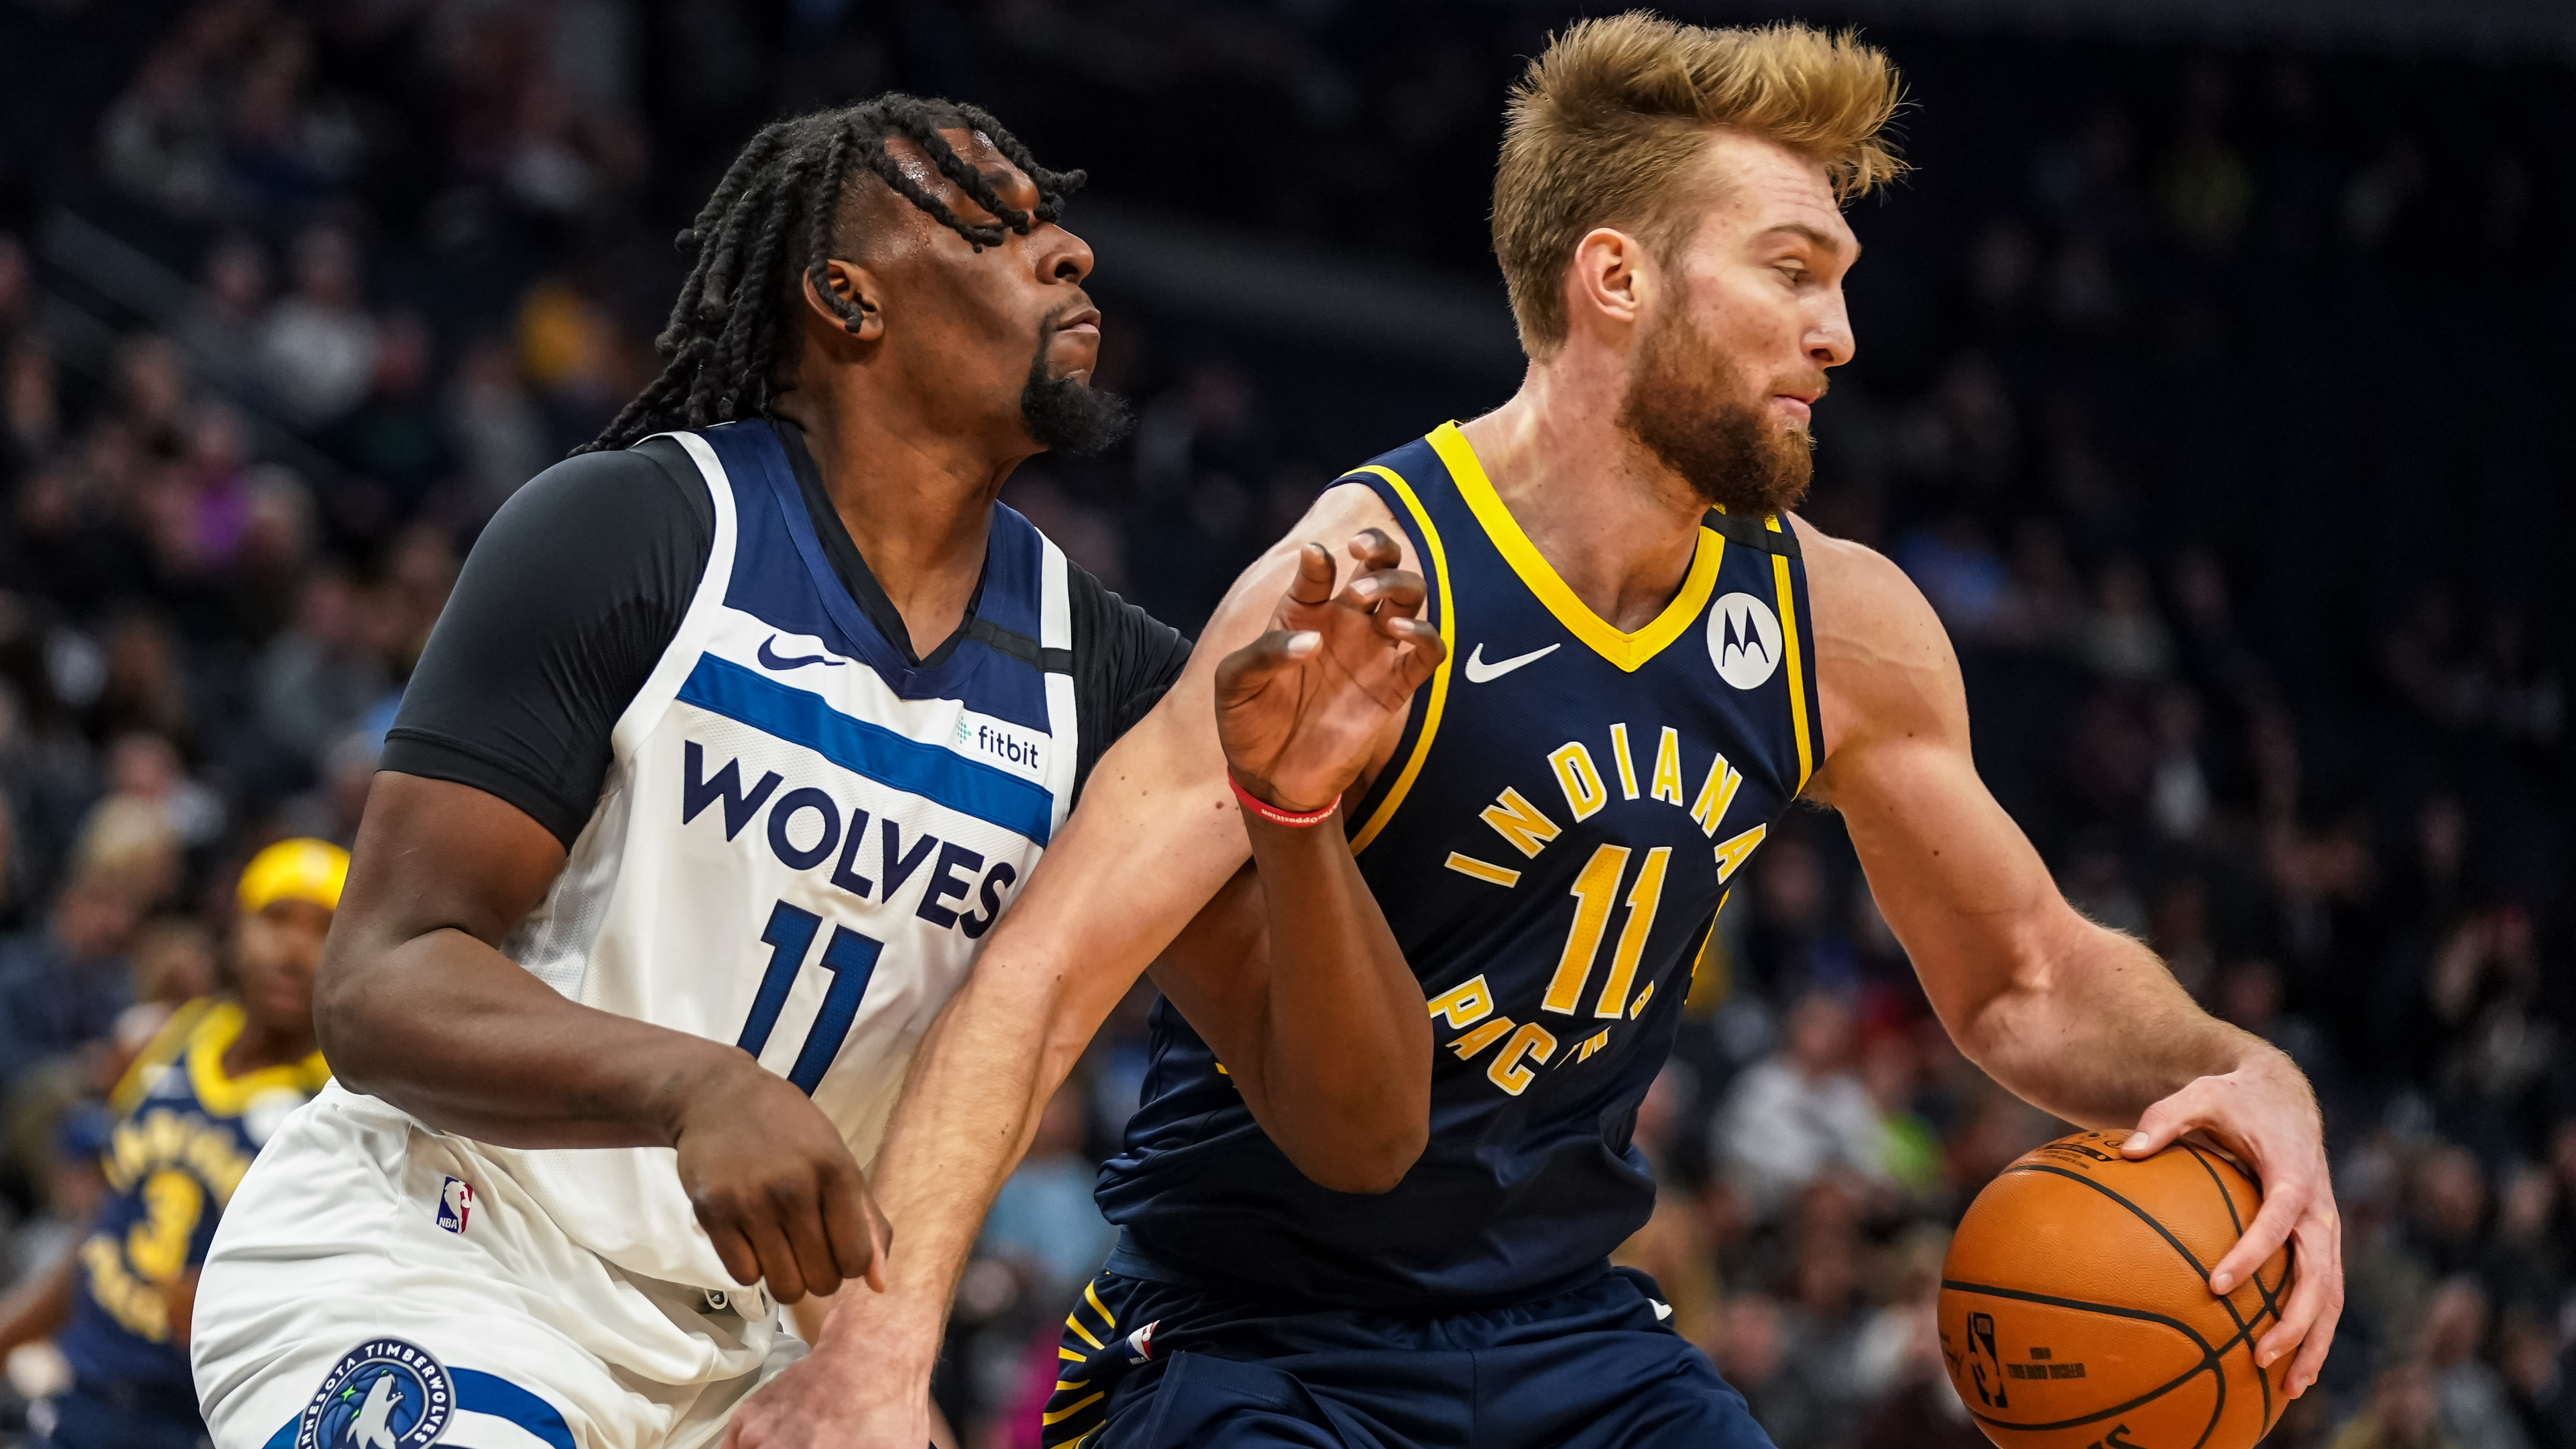 Sabonis scores 29 as Pacers win third straight, 104-99 over Timberwolves